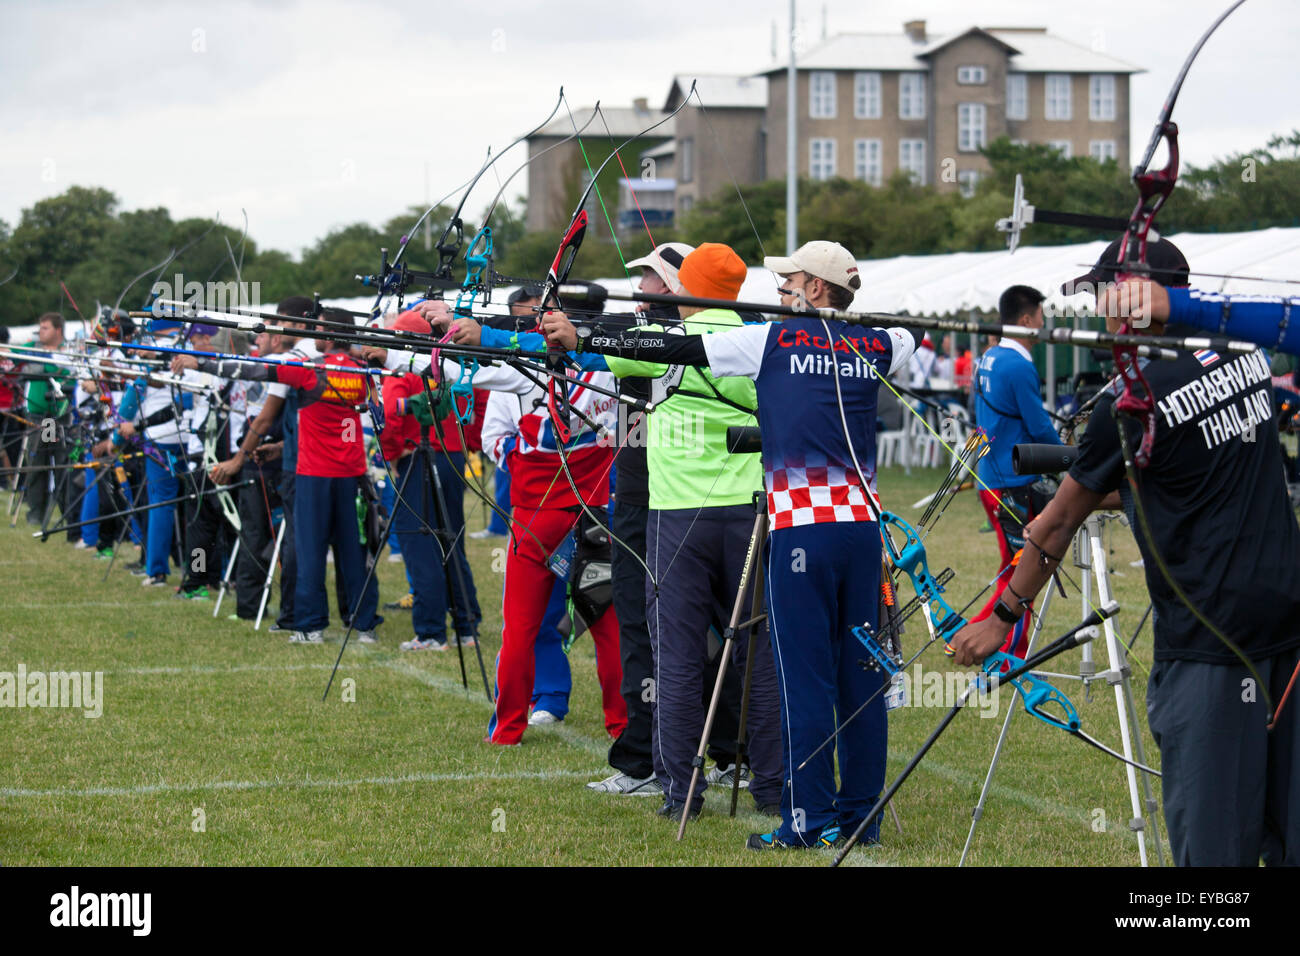 Copenhagen, Denmark, July 26th, 2015. Archers practices in Copenhagen before the qualification rounds in the World Archery Championship begins Monday, July 27th. The Copenhagen event sets world record in participating archers and nations with 623 shooters from 100 countries Credit:  OJPHOTOS/Alamy Live News Stock Photo